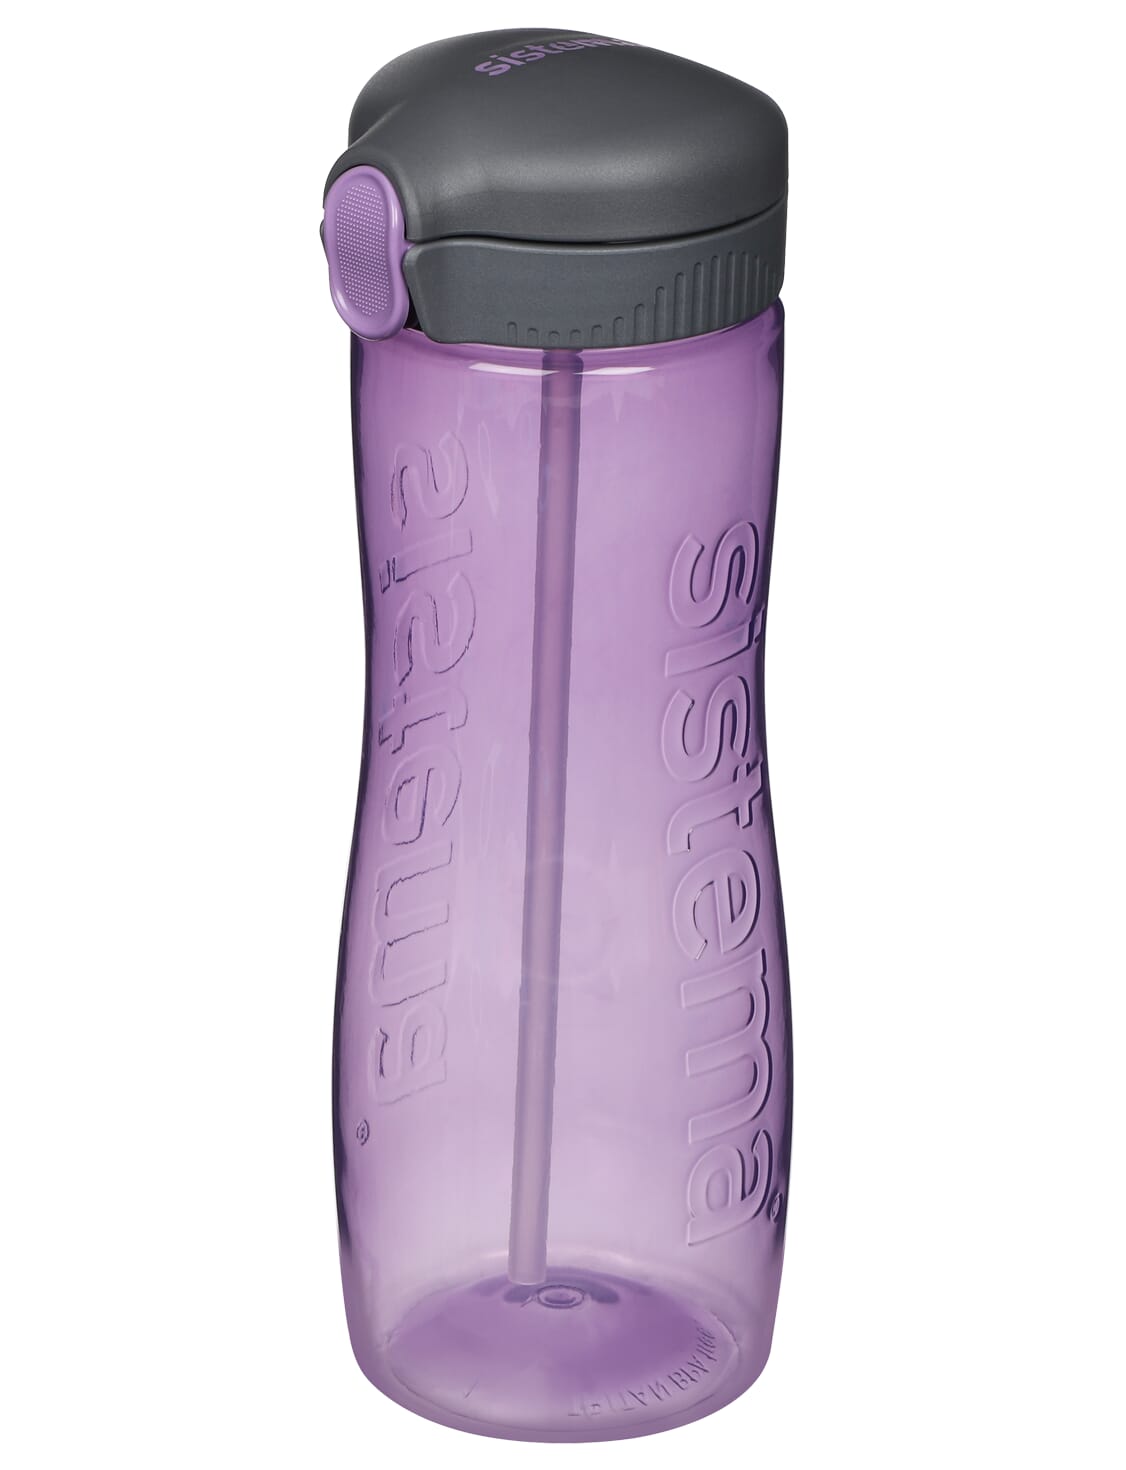 Sistema Hydrate Quick Flip Water Bottle800 mlBPA Free Water Bottle with 